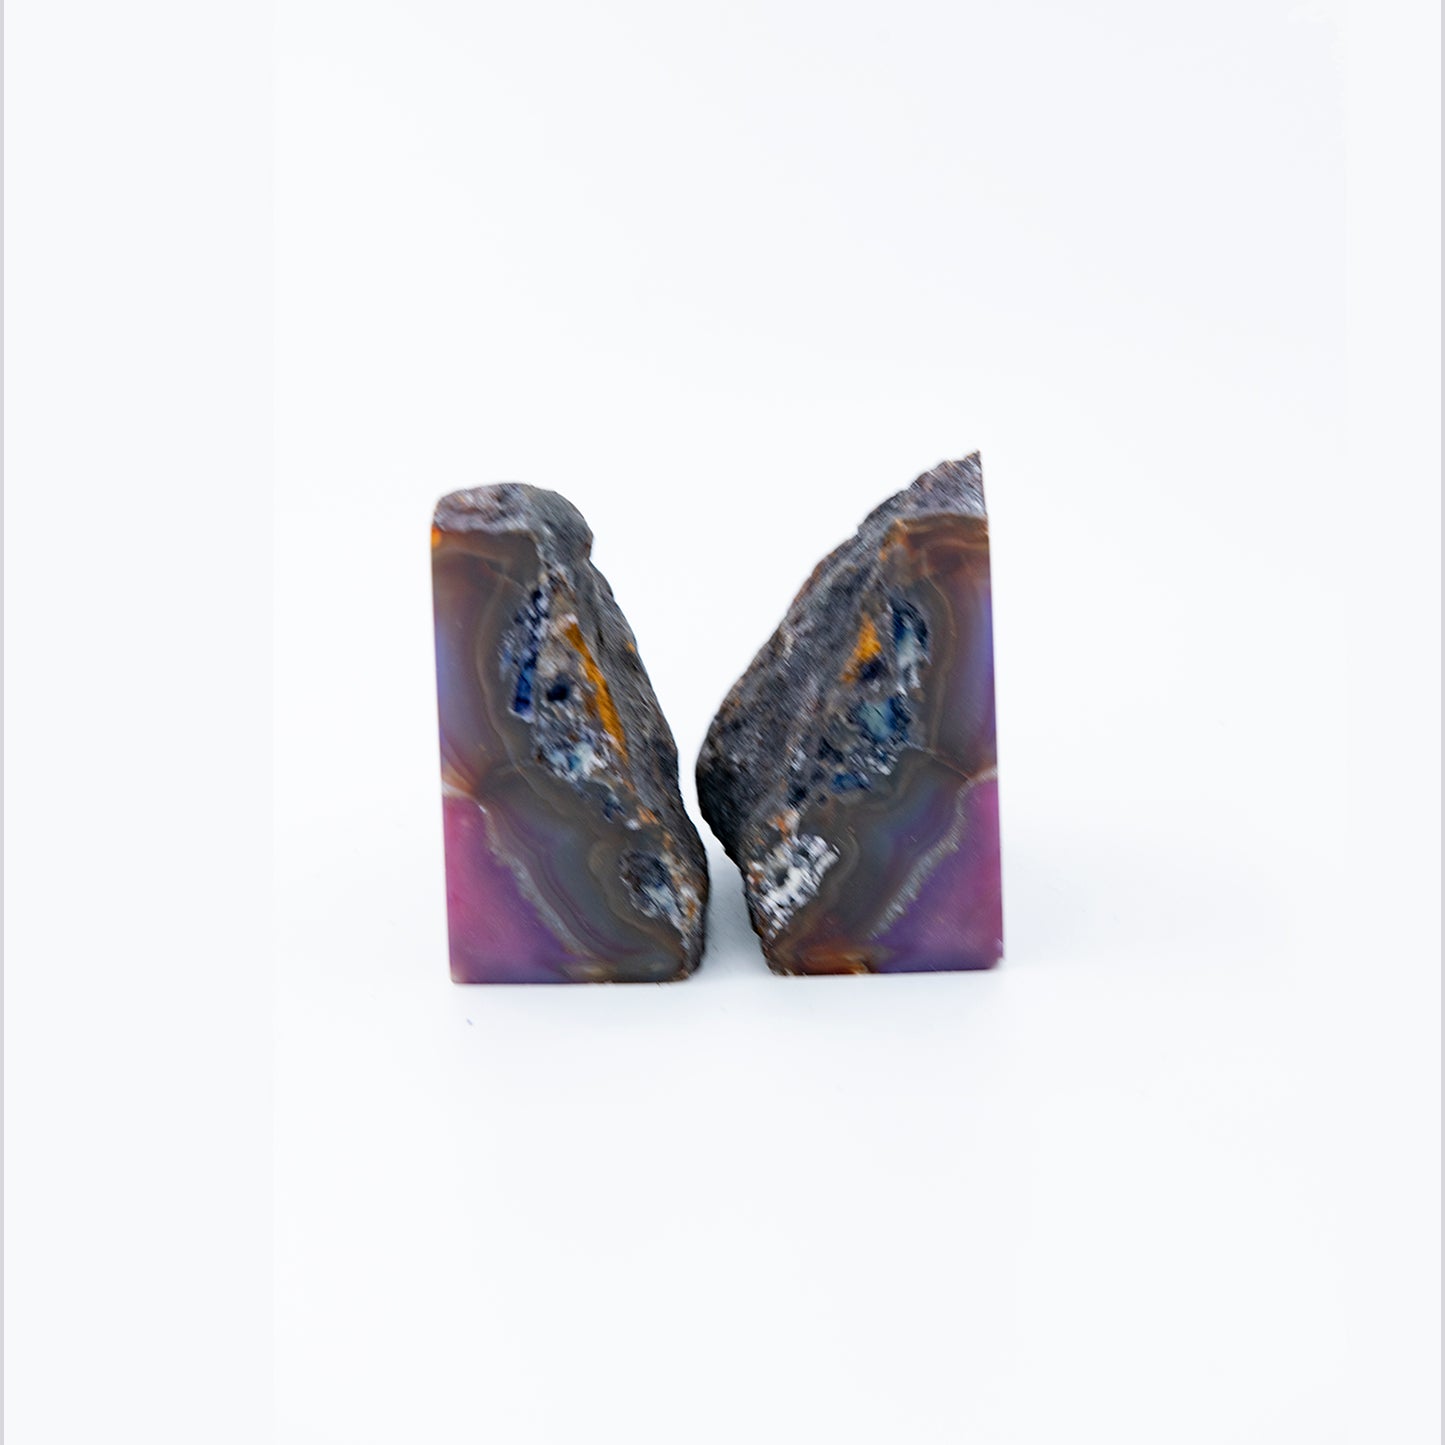 Brazilian Agate Bookends.  Beautifully figured Agate bookends. Size 7 inches wide and 4 inches high.  Purple color has been added.